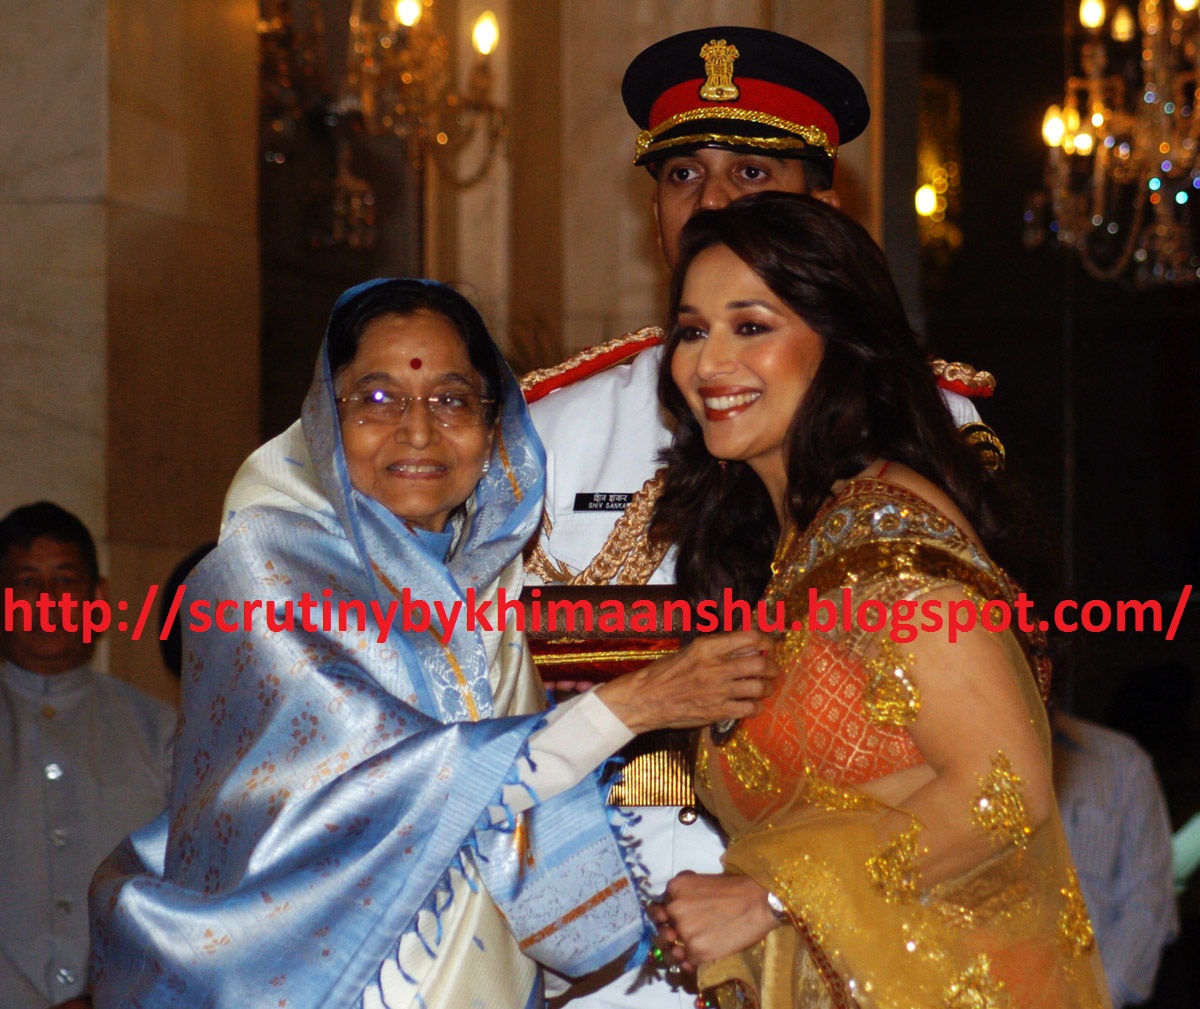 Scrutiny: Corruption, frauds, scams need more attention than Madhuri Dixit!